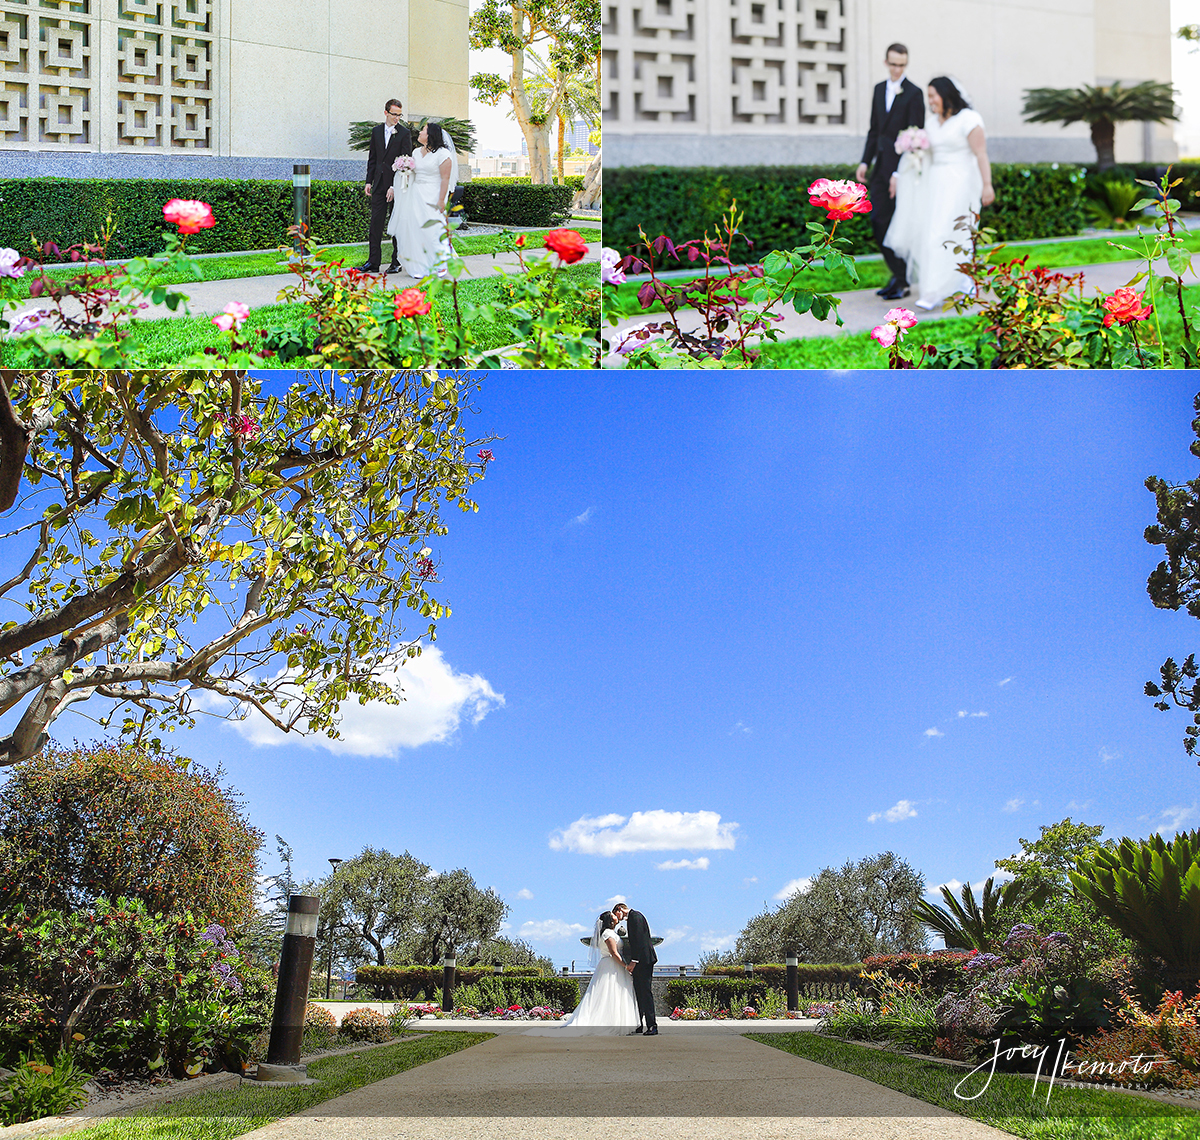 Los-Angeles-California-Temple-Westwood-and-Odyessy-Restaurant-Wedding_0010_Blog-Collage-1466202469455